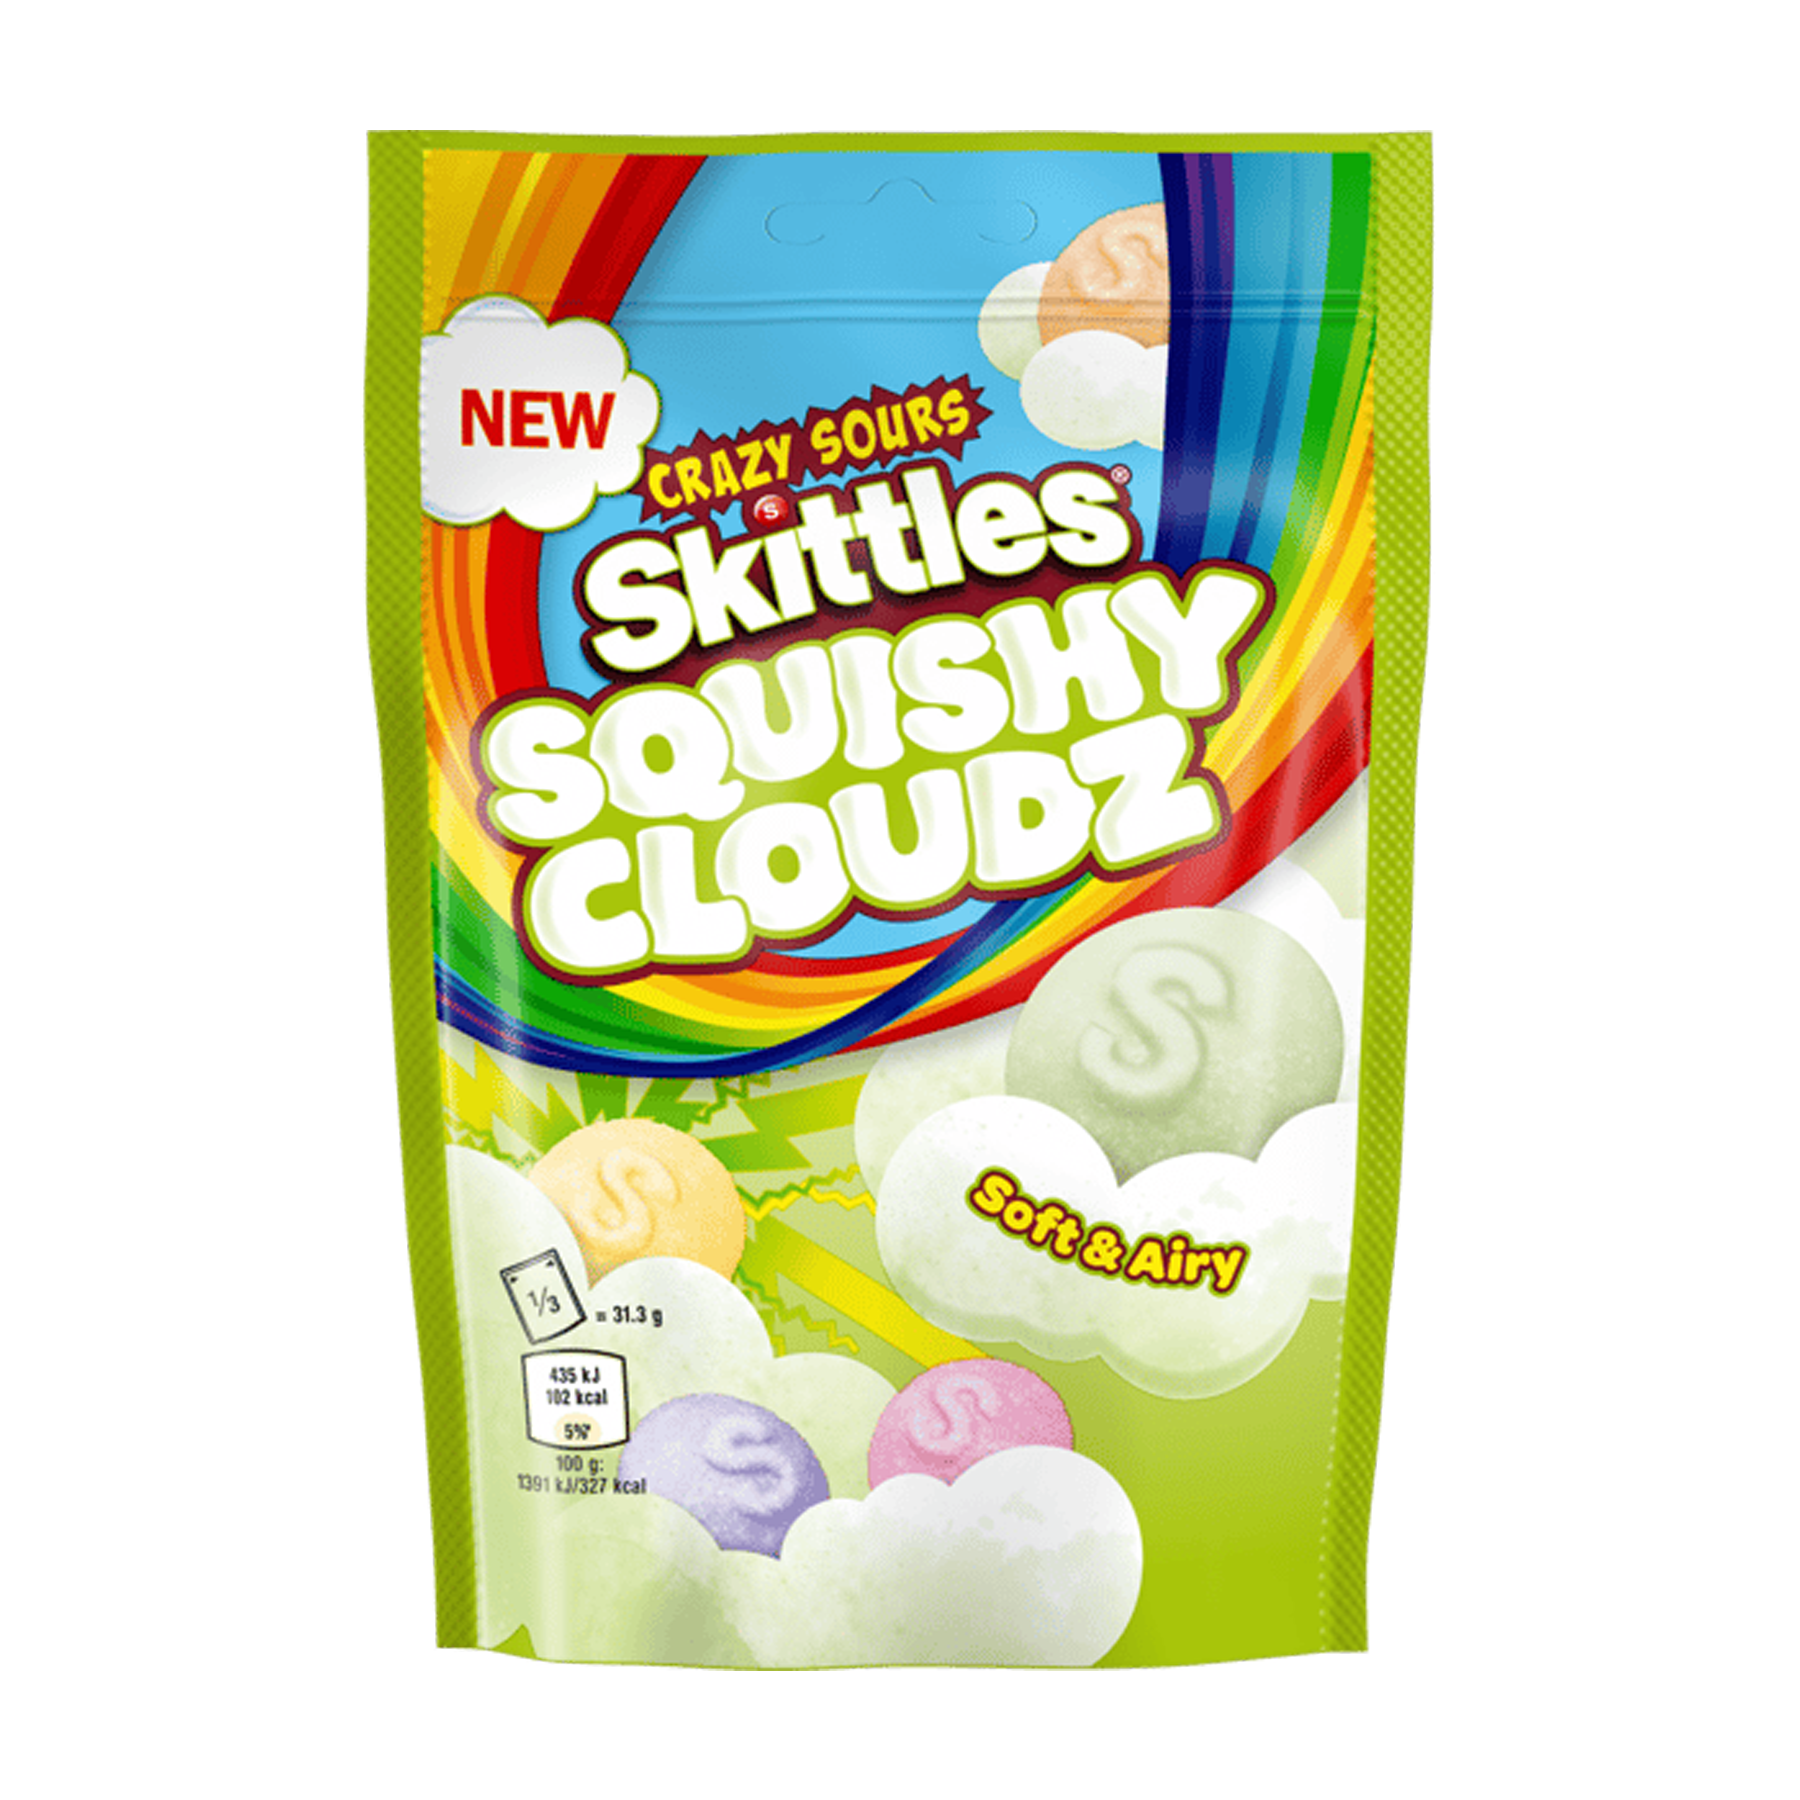 Skittles Squishy Cloudz Crazy Sours Sweets Bag